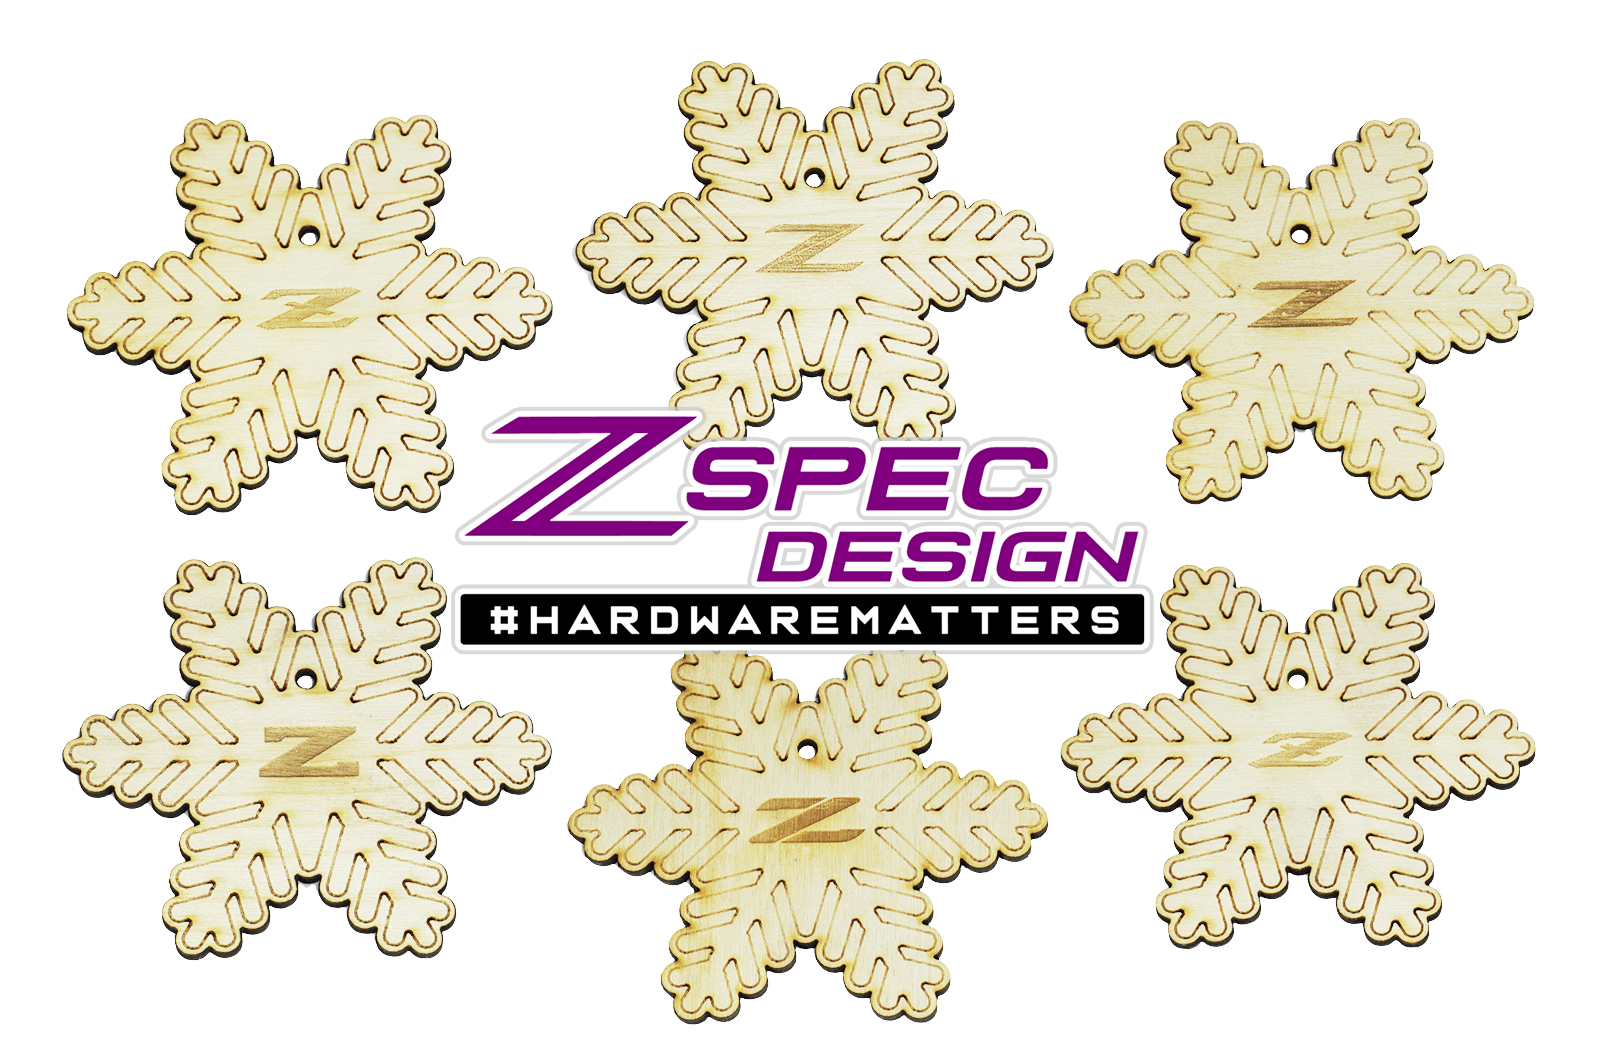 ZSPEC Laser-Engraved Wood Ornaments, Set of Six Nissan Z-Snowflakes  Man-cave, holiday tree... 1/8' Birch Plywood construction, Laser-cut. Includes Hook for Hanging. ZSPEC Design LLC